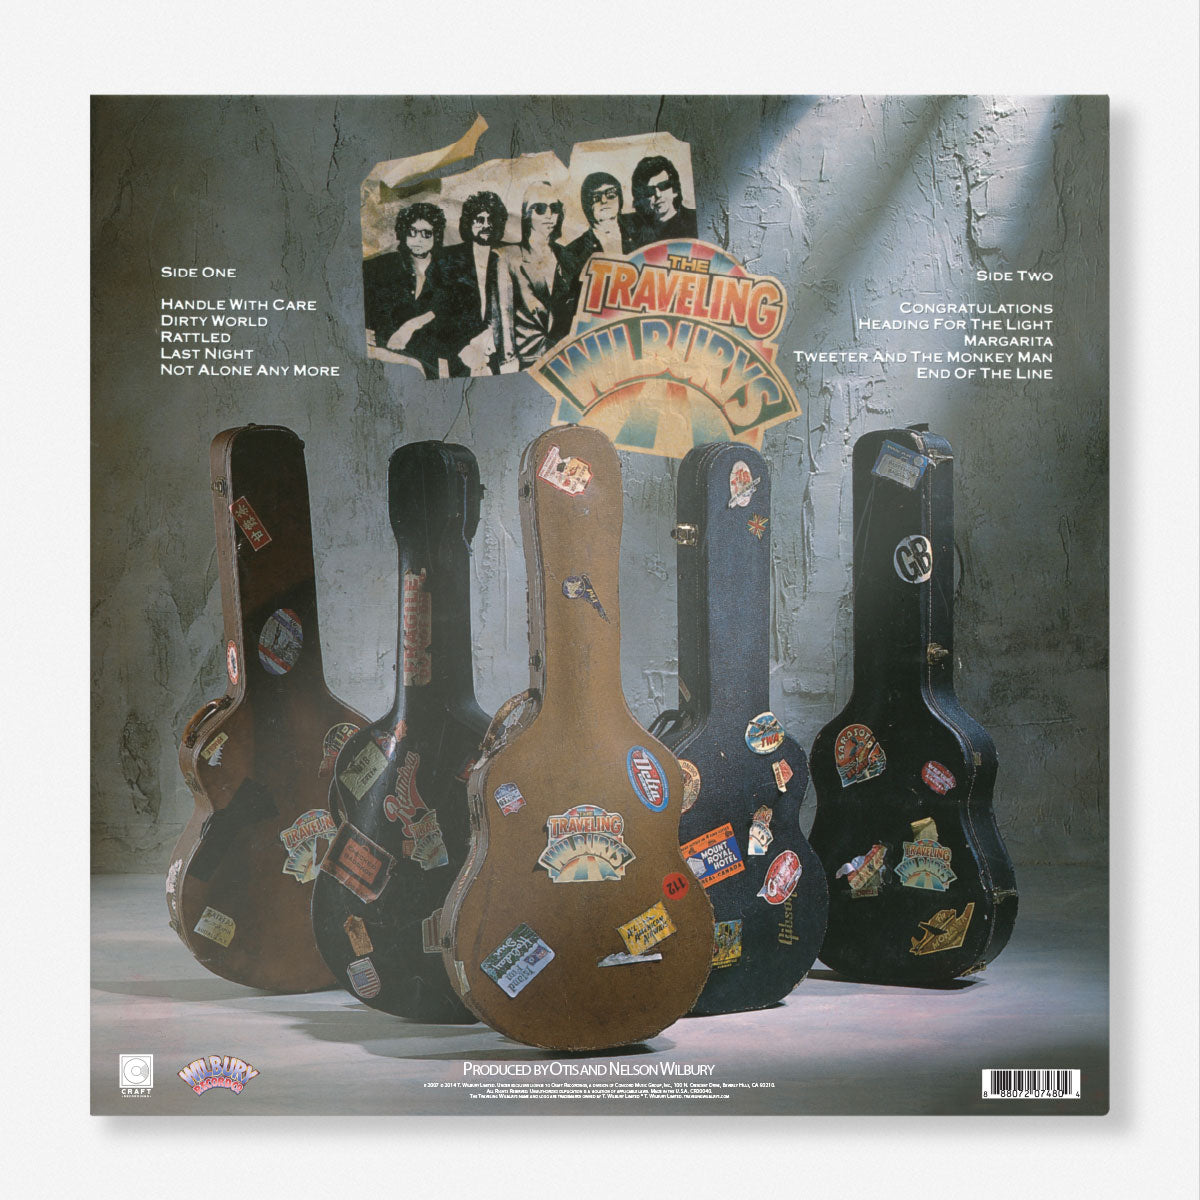 The Traveling Wilburys The Traveling Wilburys, 1 (30th Anniversary Picture Disc) – Craft